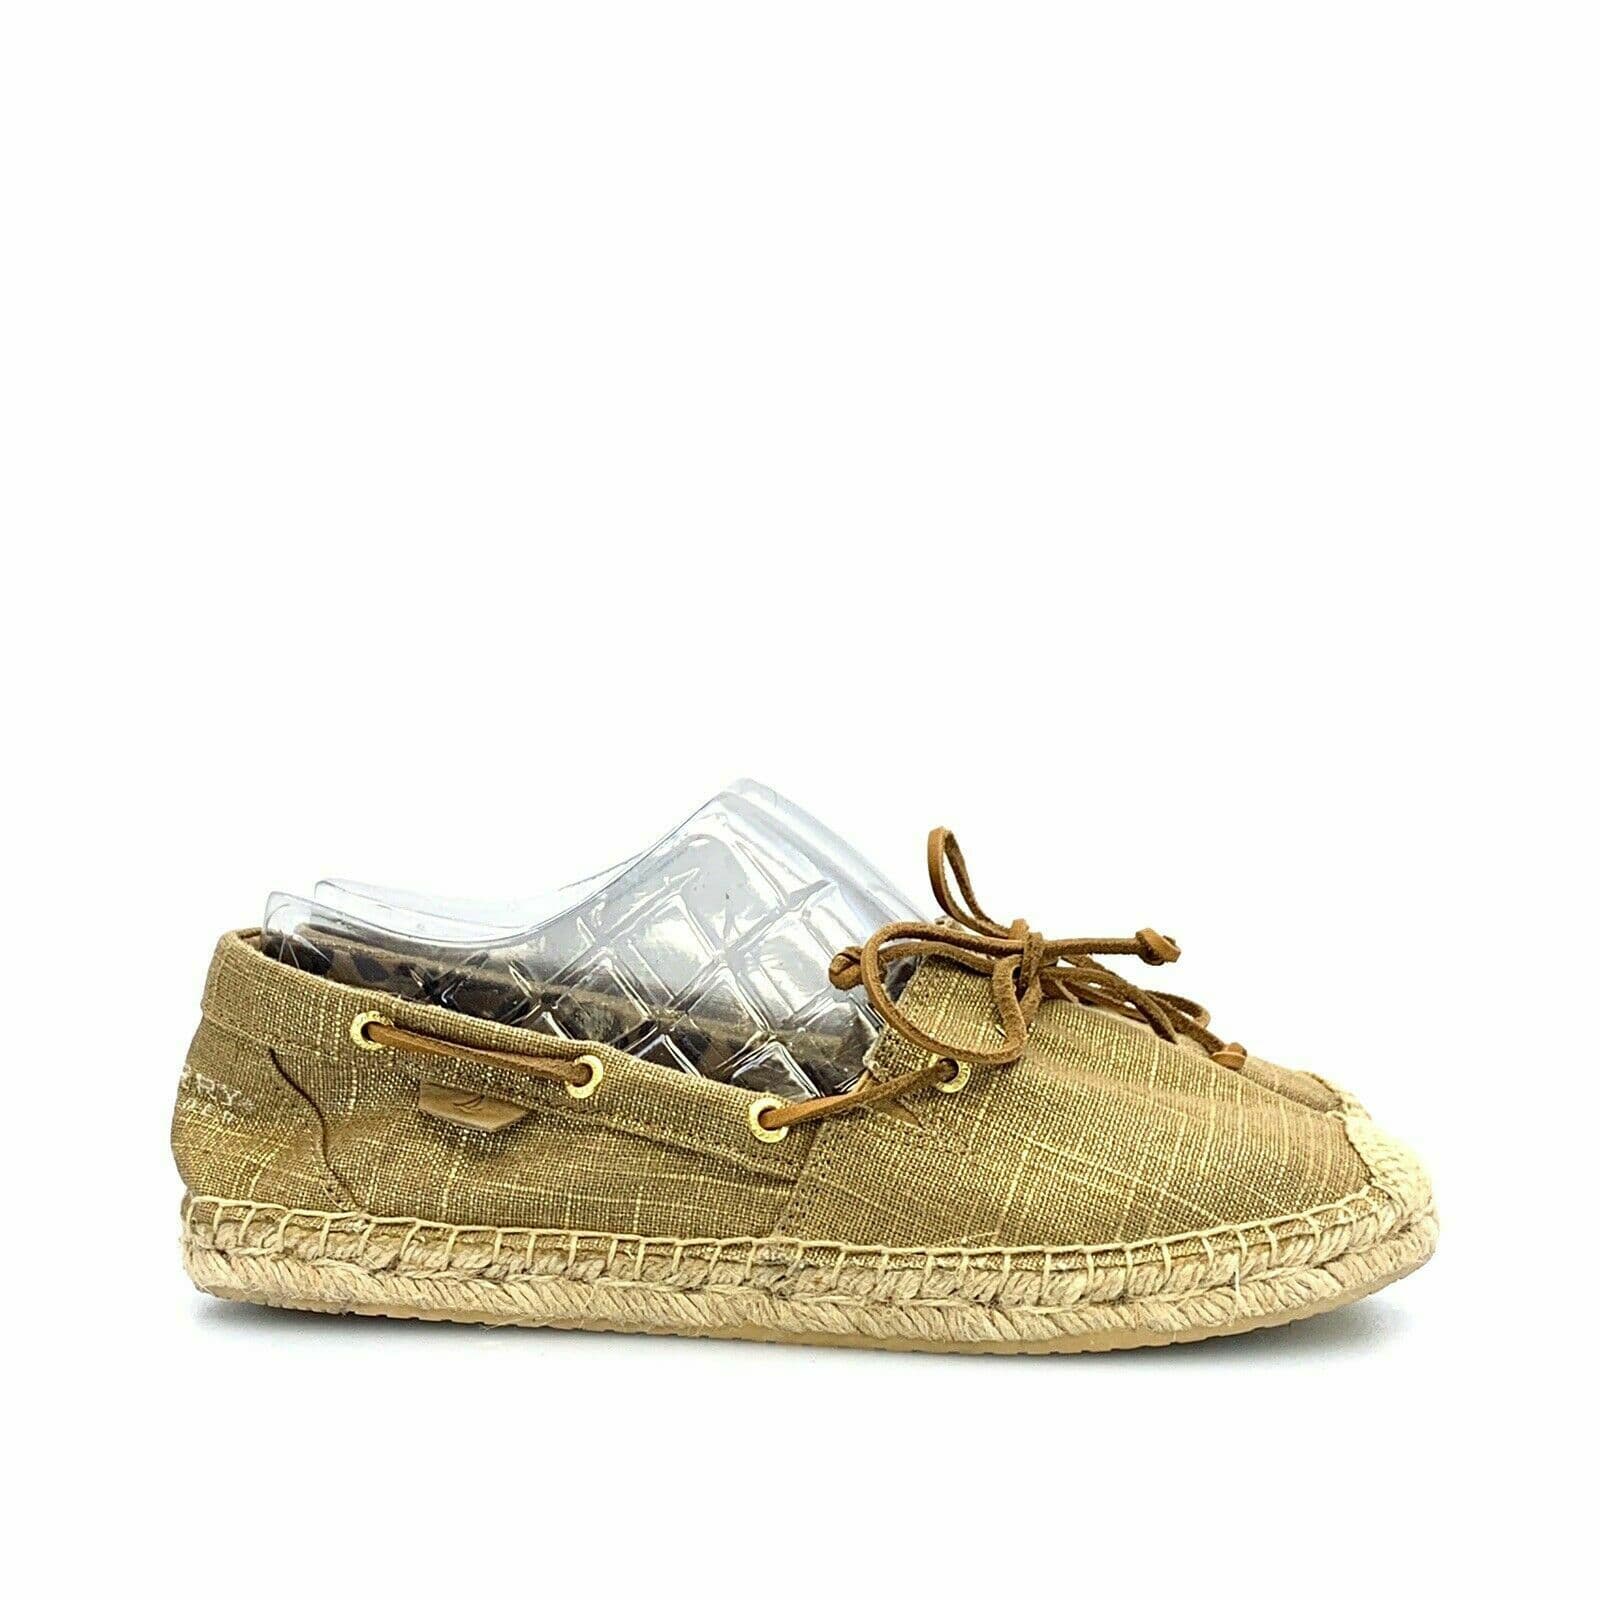 Sperry Top Sider Womens Shoes Size 9 Gold Canvas Slip On - parsimonyshoppes